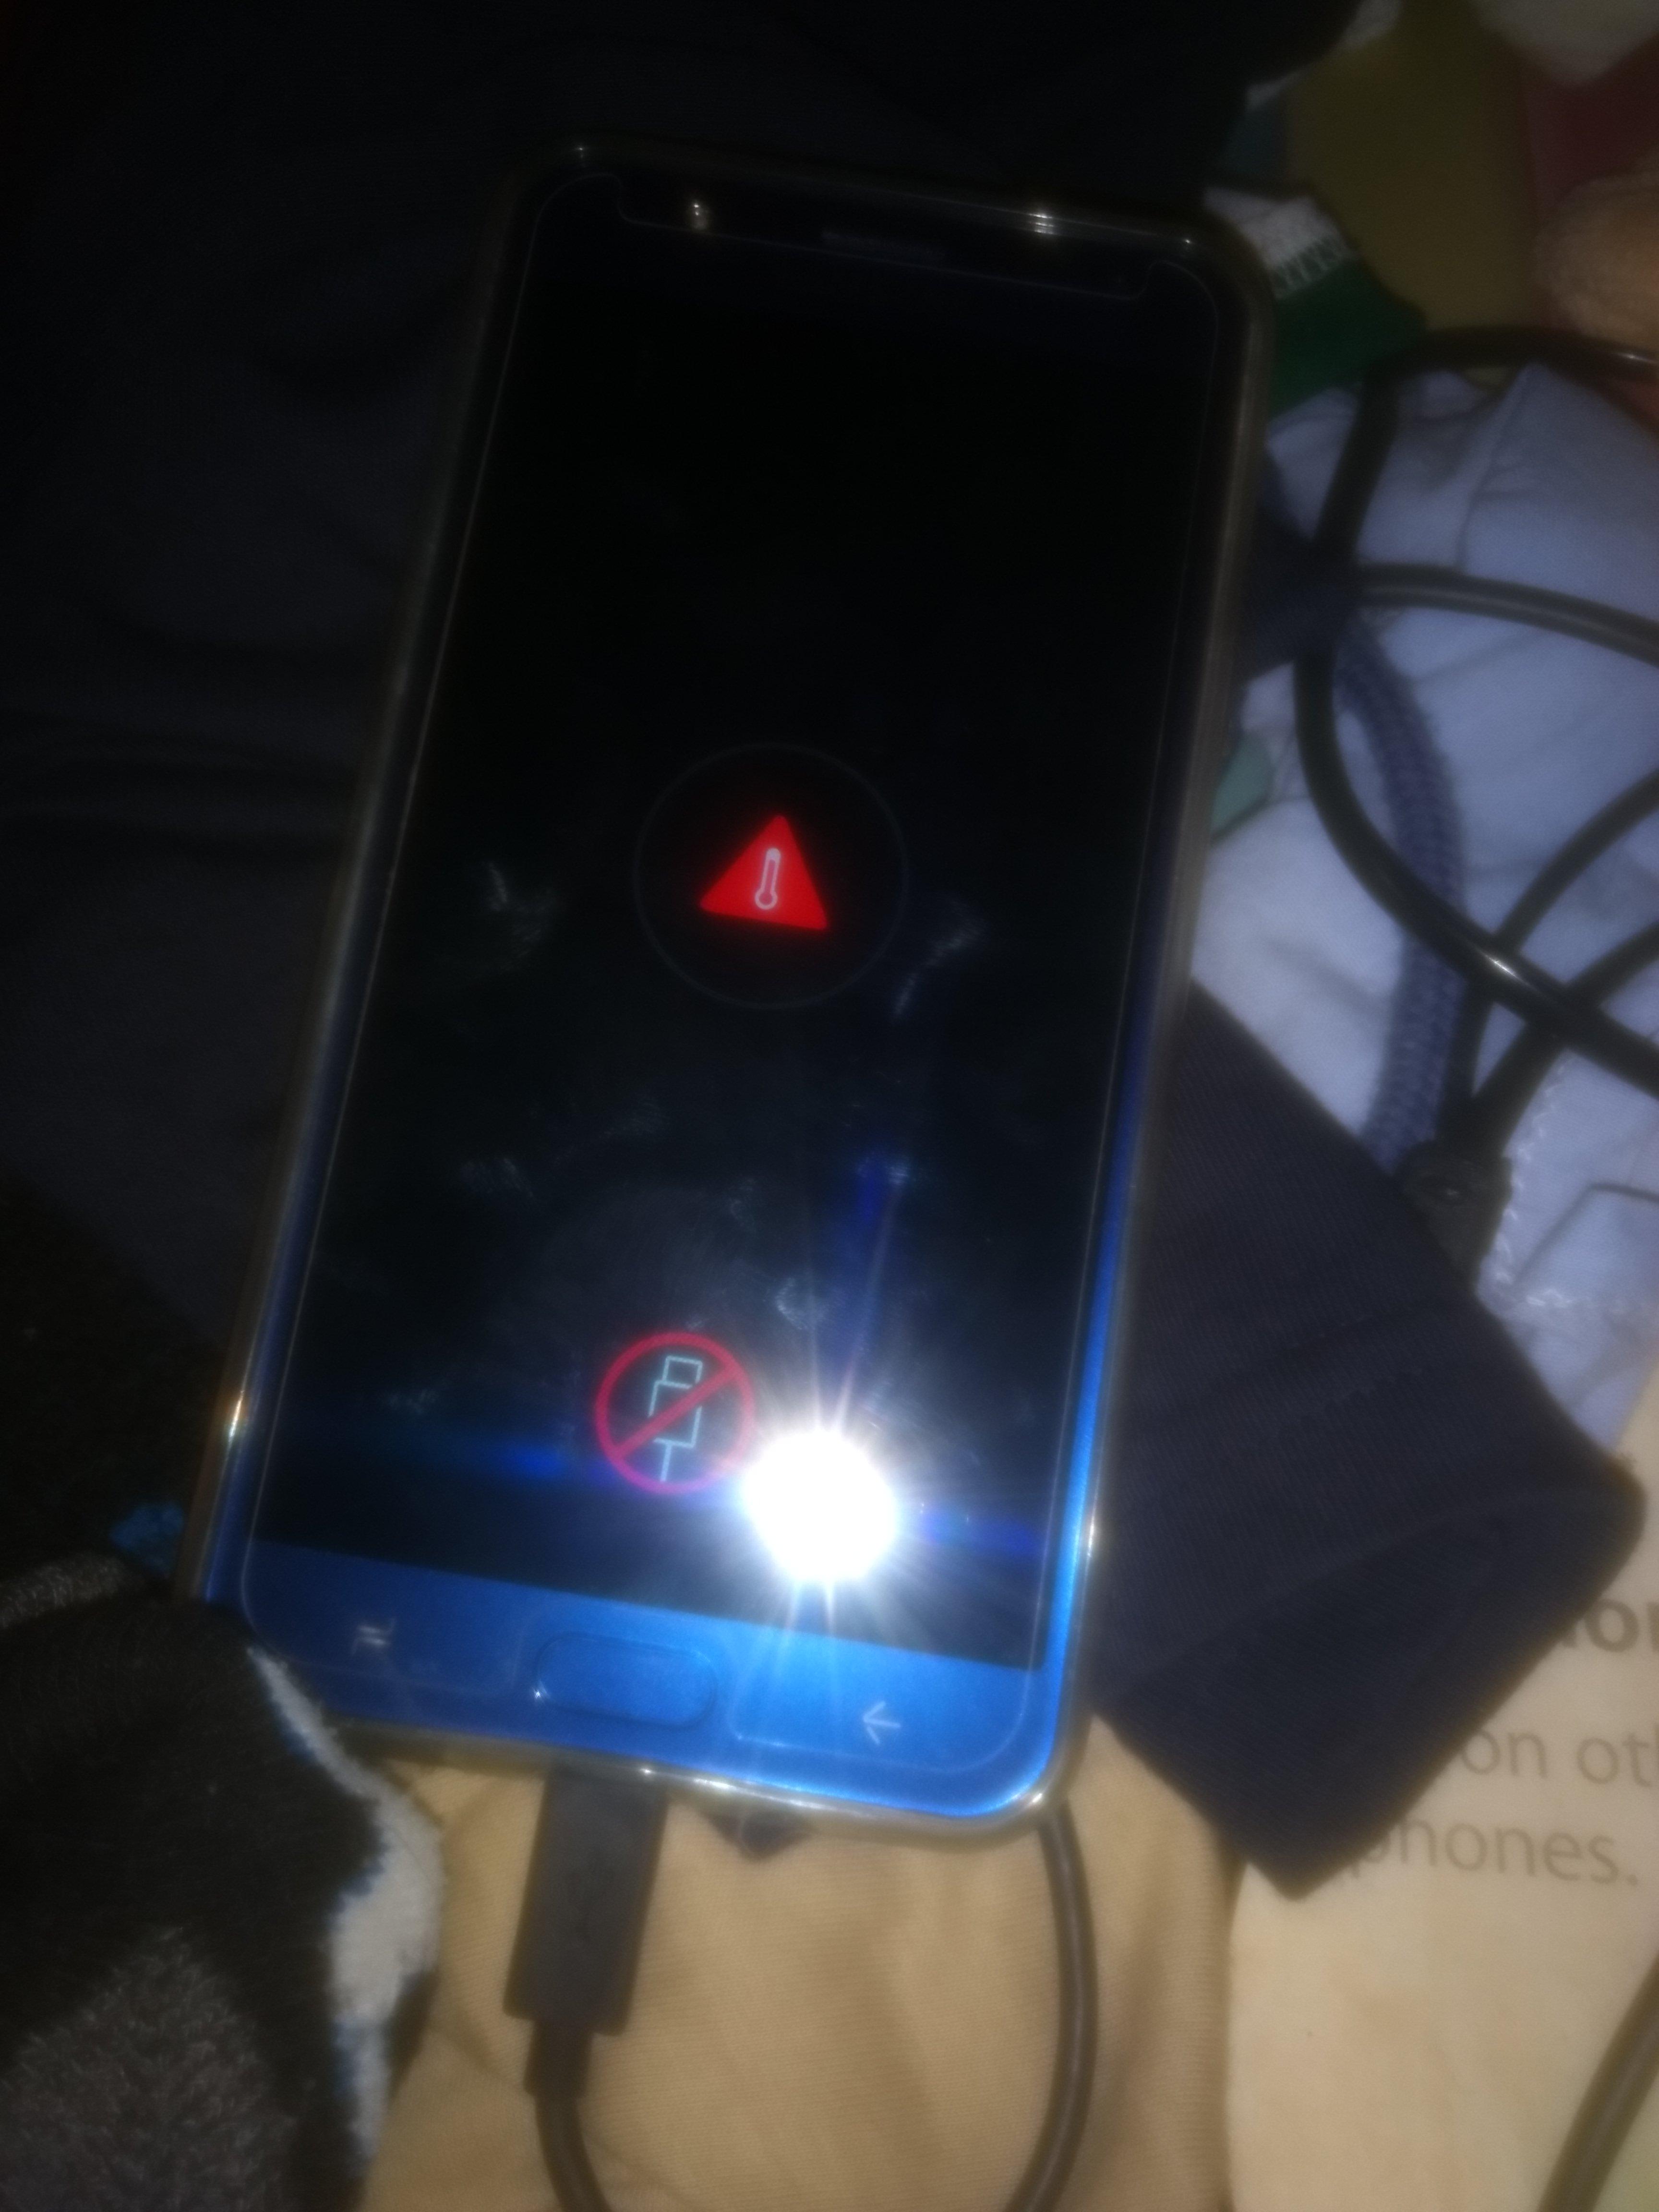 what does the red light mean on samsung galaxy s7